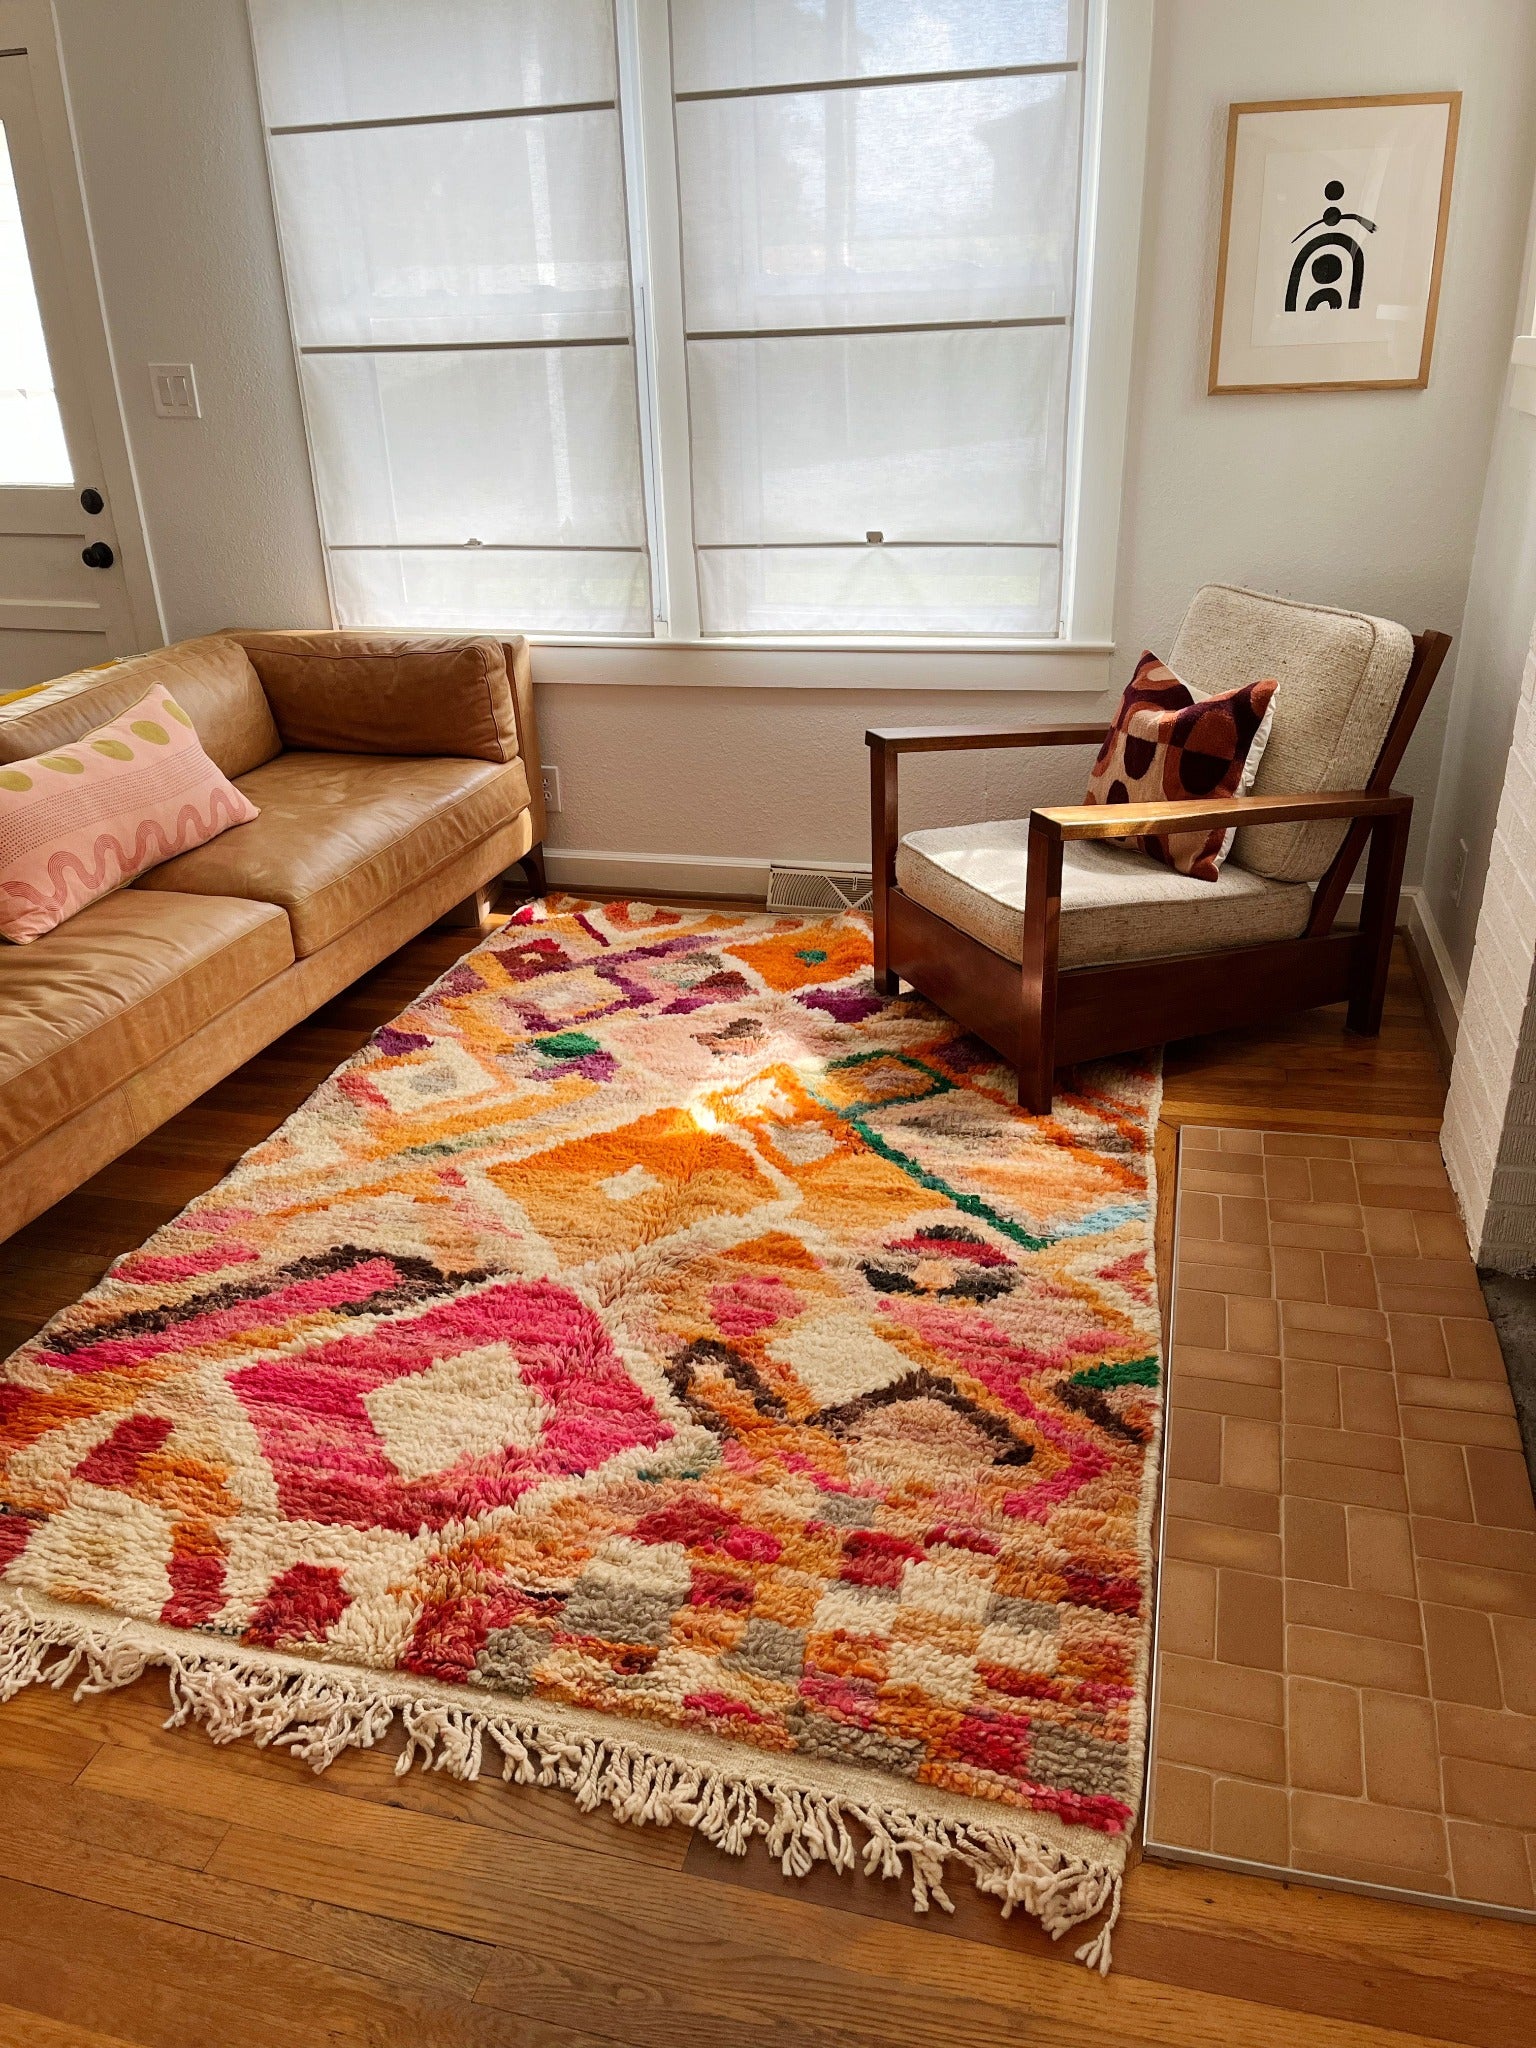 Explore the Fizz Moroccan Rug Styled in a Living Room